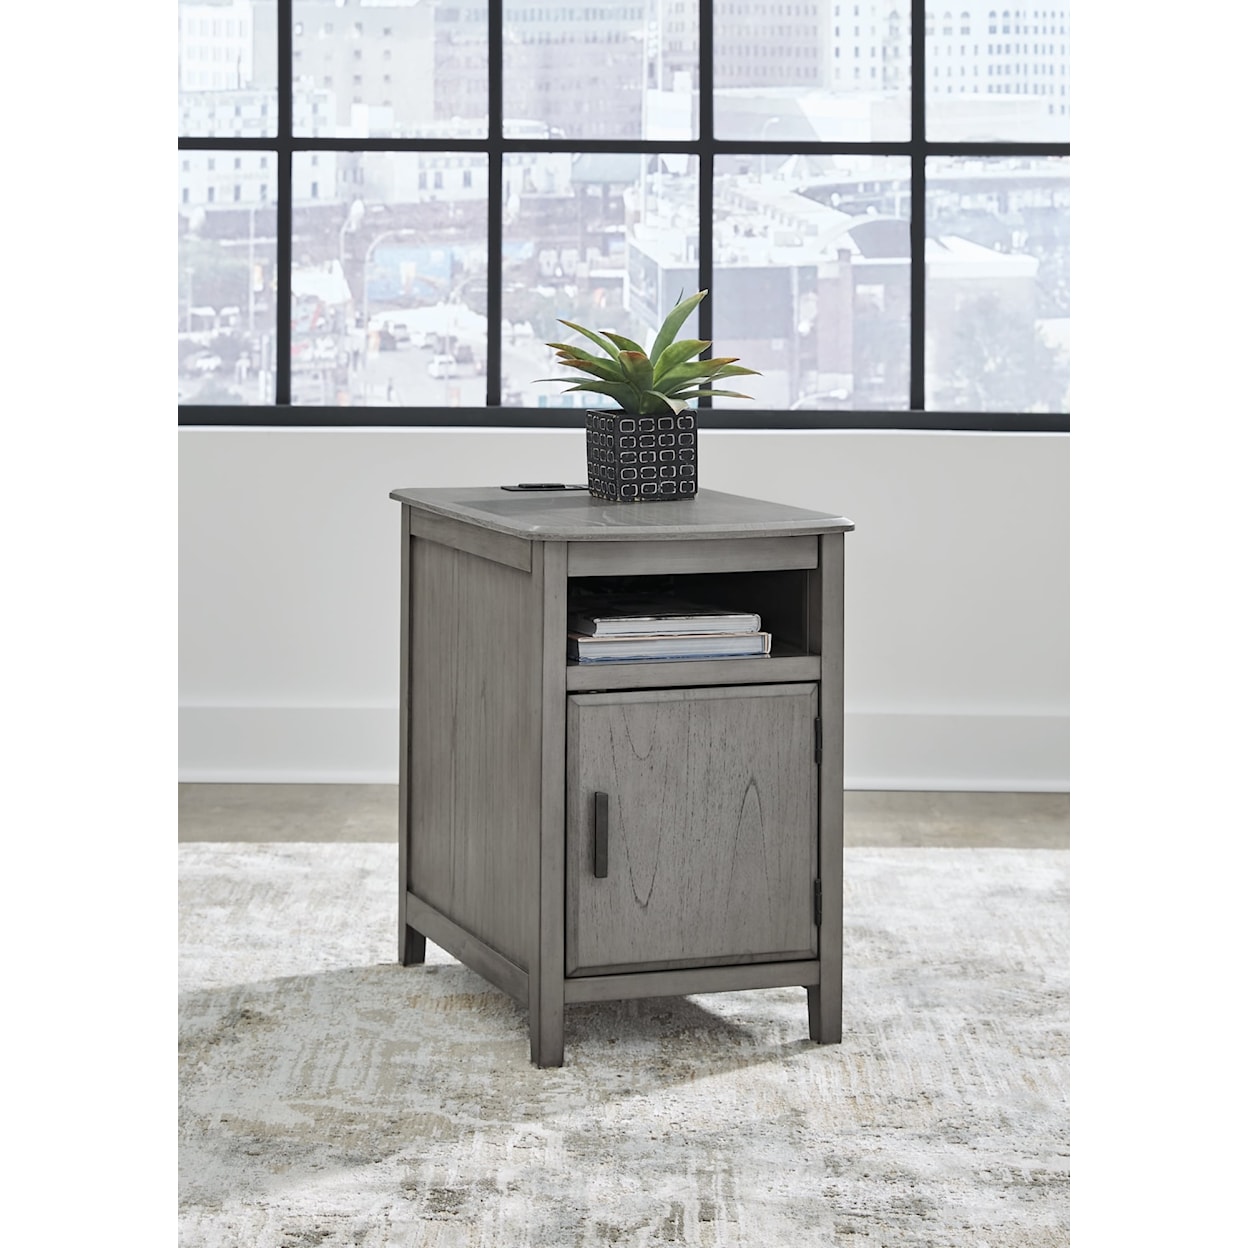 Signature Design by Ashley Furniture Devonsted Chair Side End Table